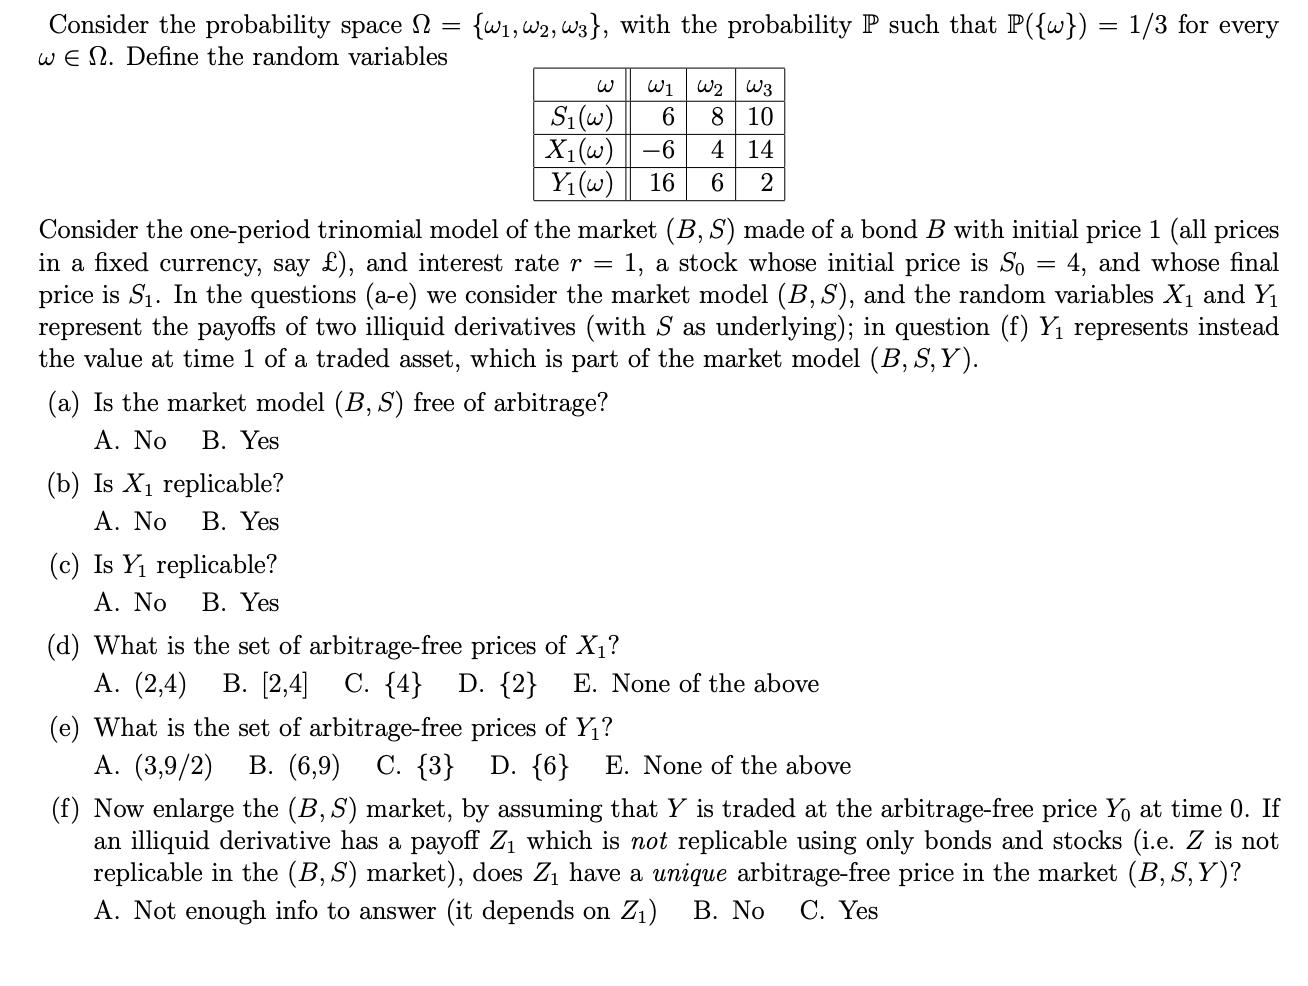 Consider the probability space= {w, W2, W3], with the probability P such that P({w}) = 1/3 for every wen.